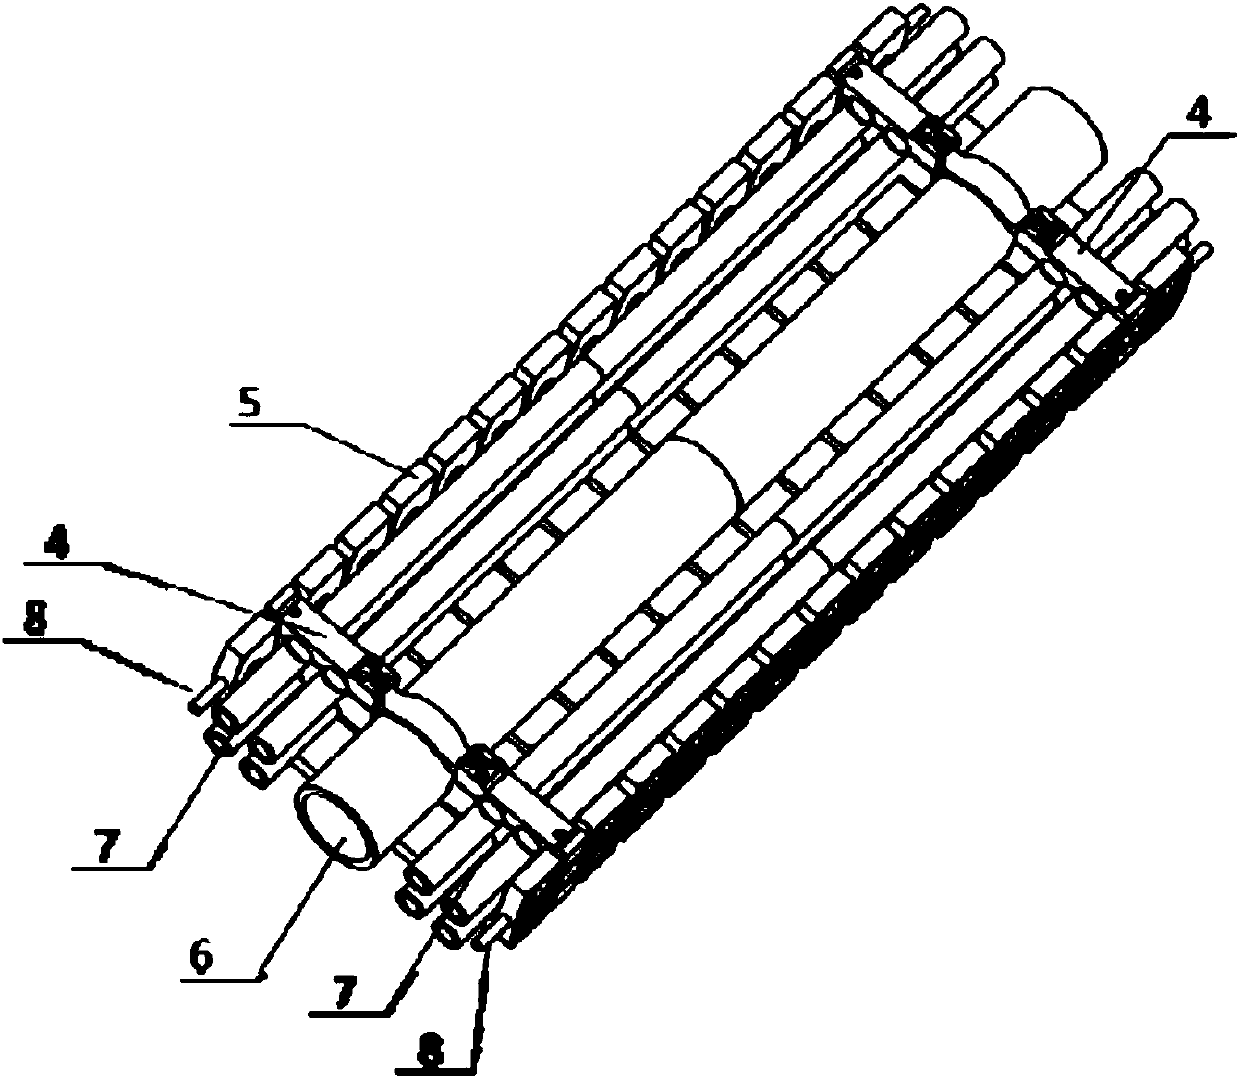 Winding device used for multiple flexible pipelines